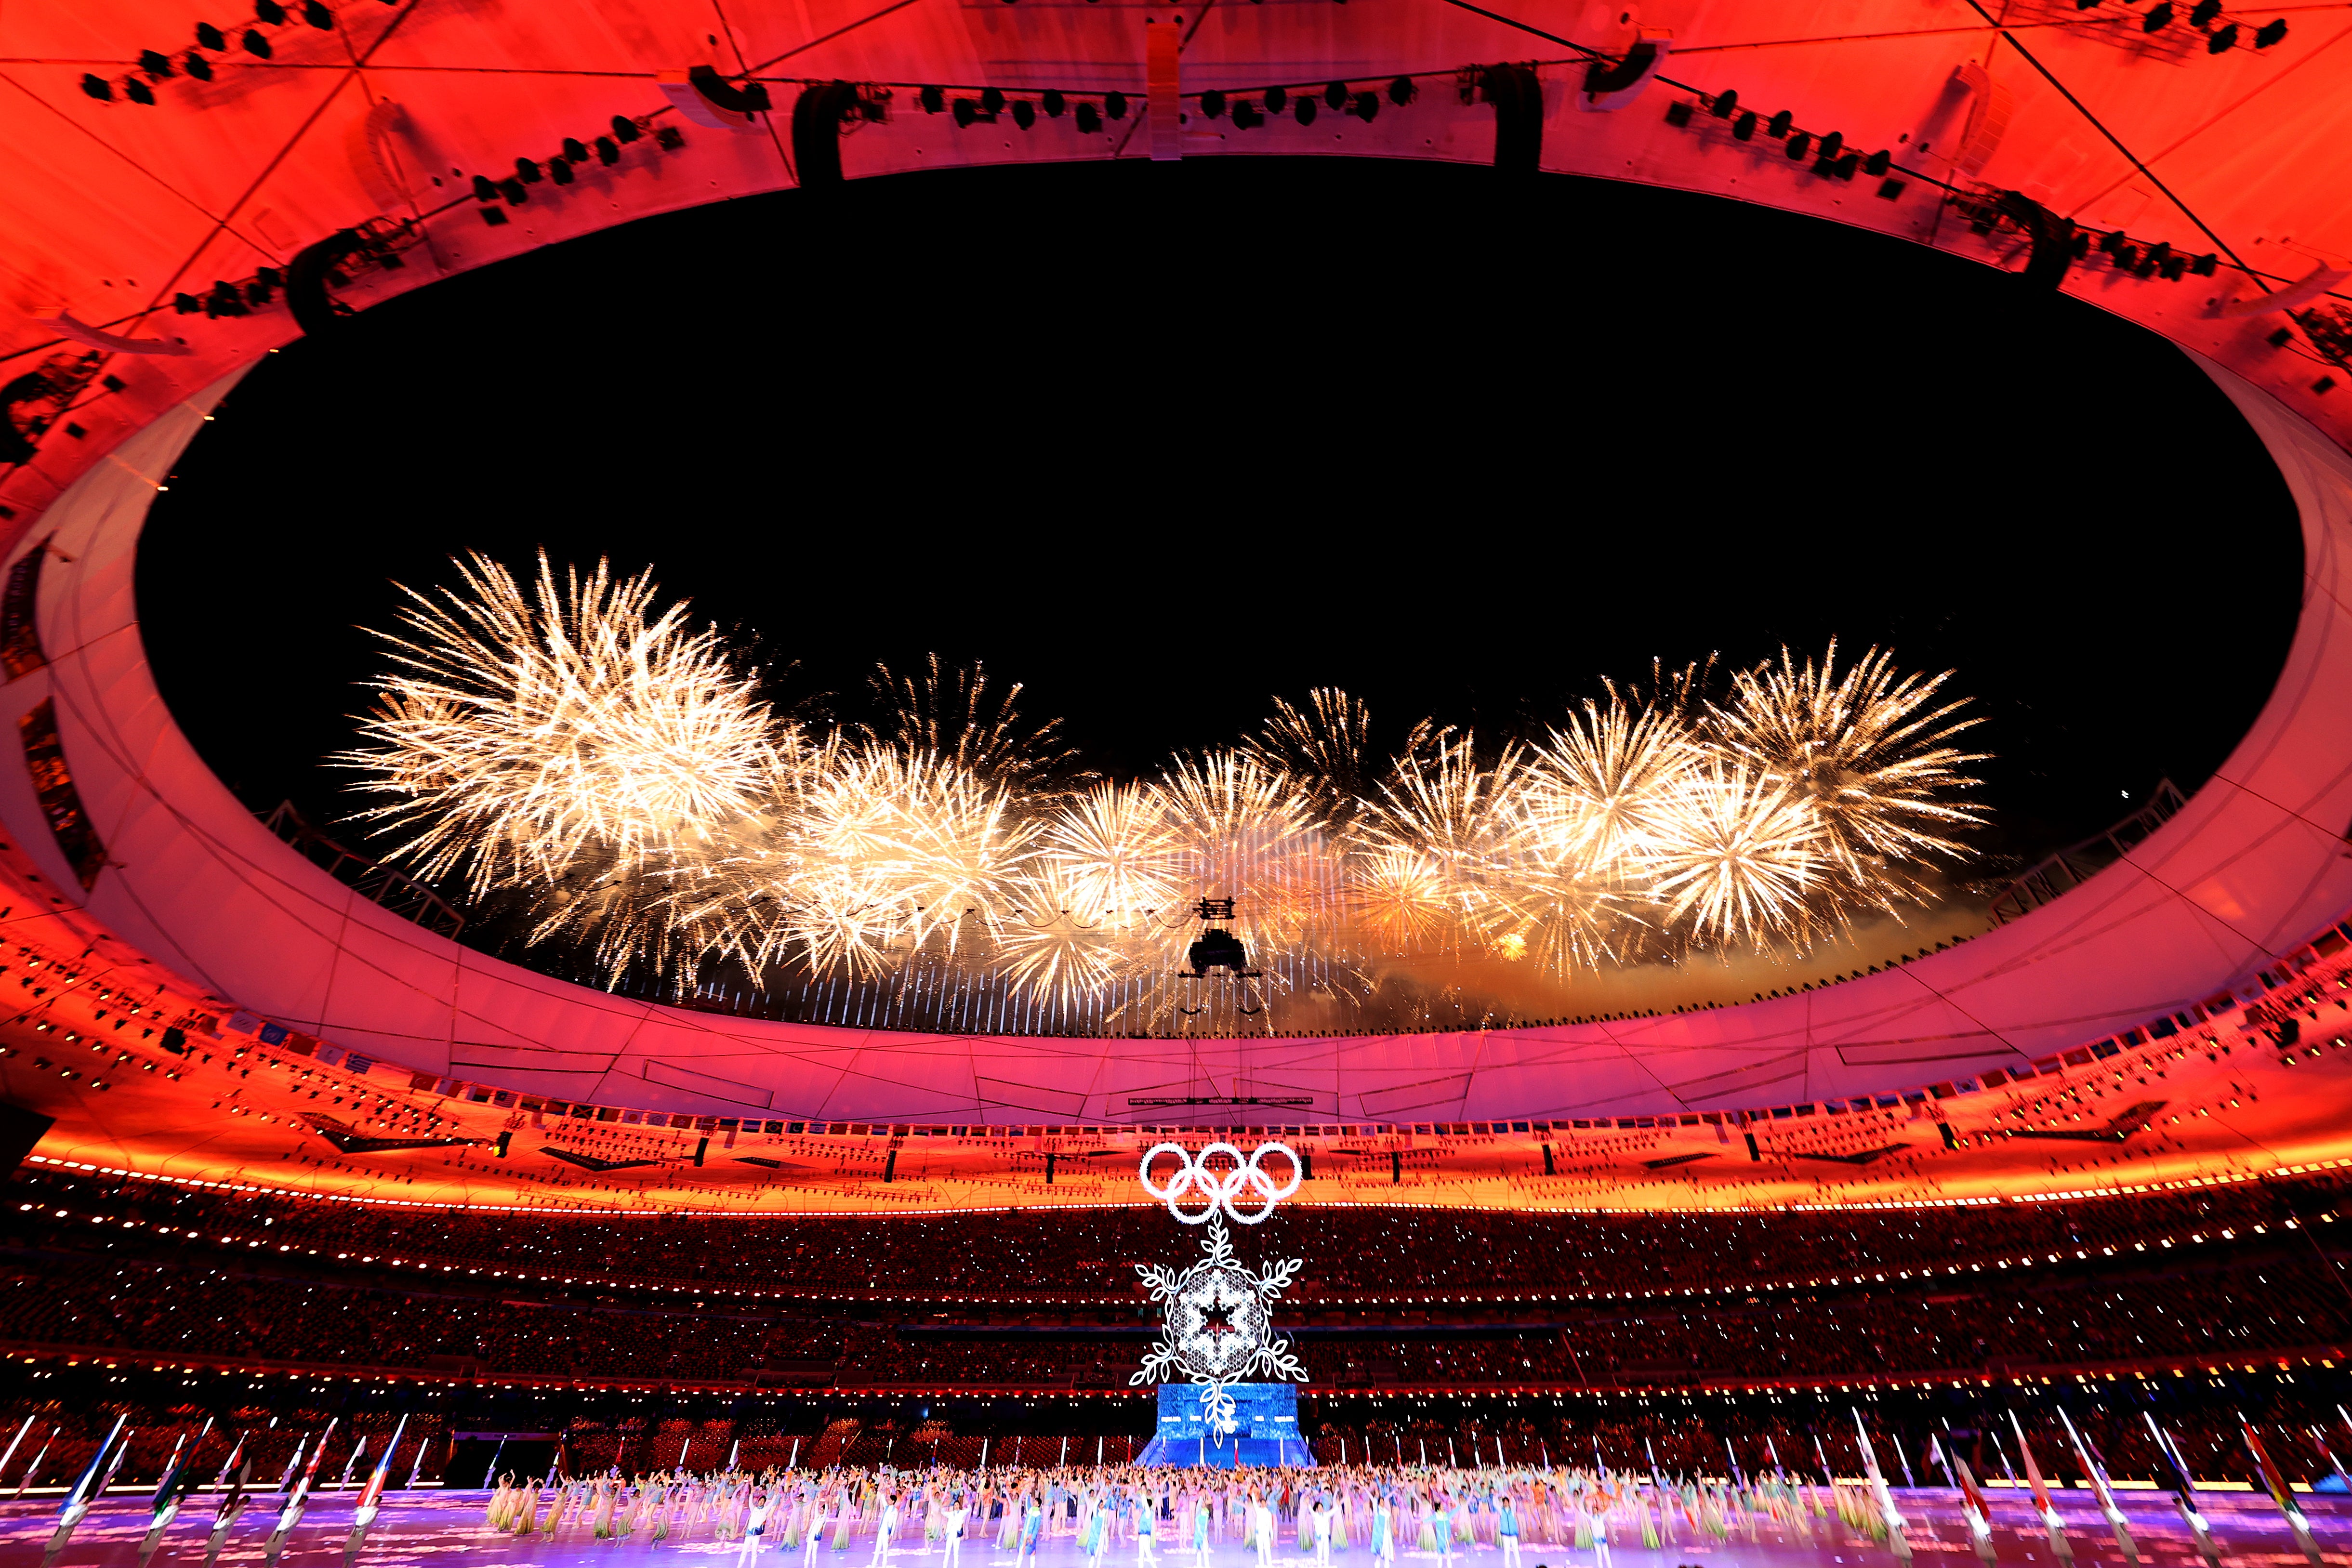 The Winter Olympics ends at a spectacular closing ceremony - but it’s been a bad two weeks for the IOC